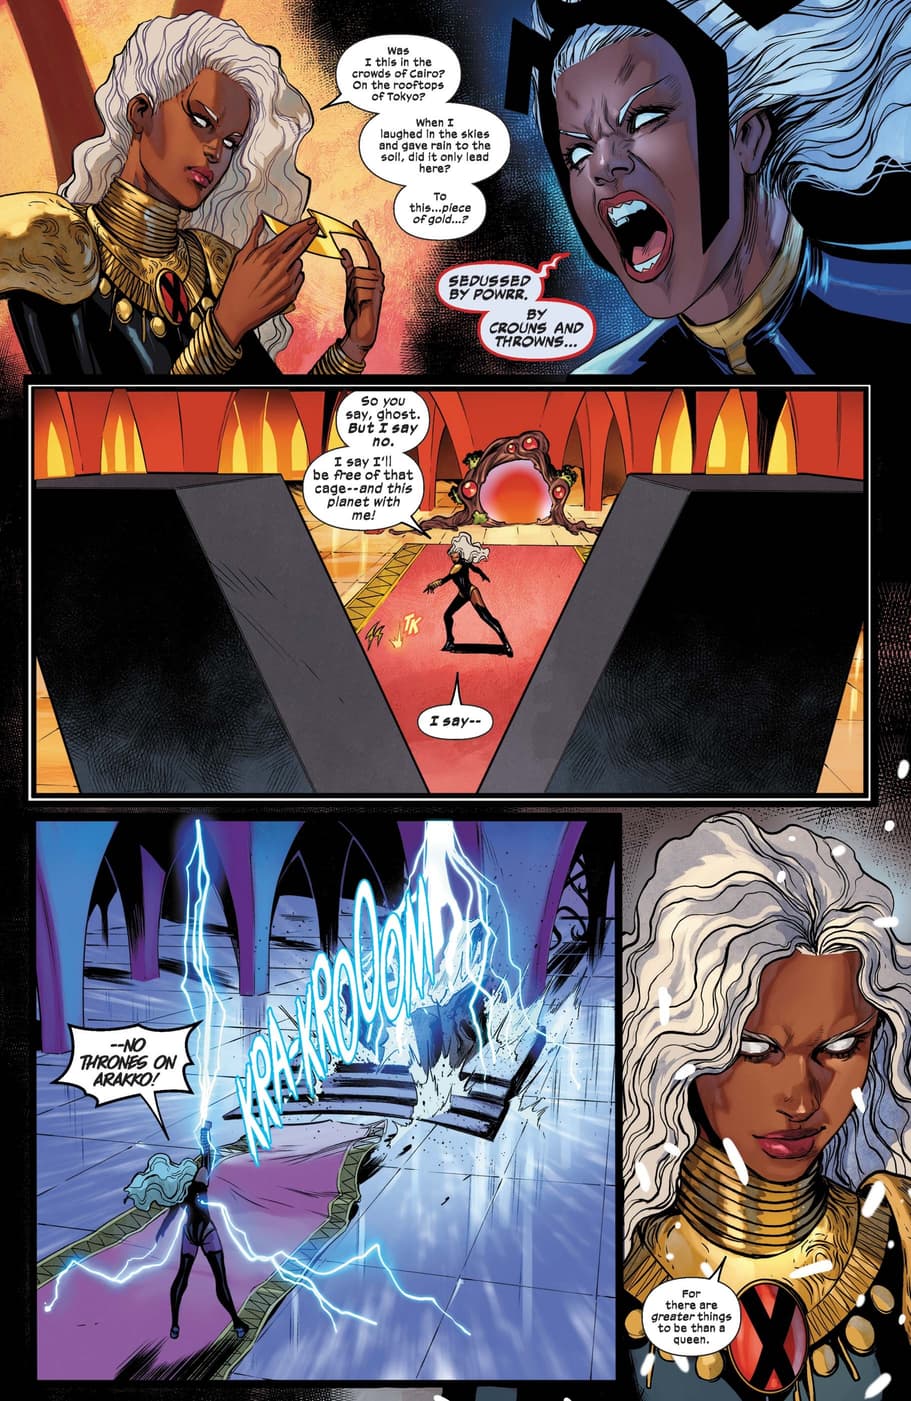 Storm redefines her role as leader of the Arakki in X-MEN RED (2022) #1.